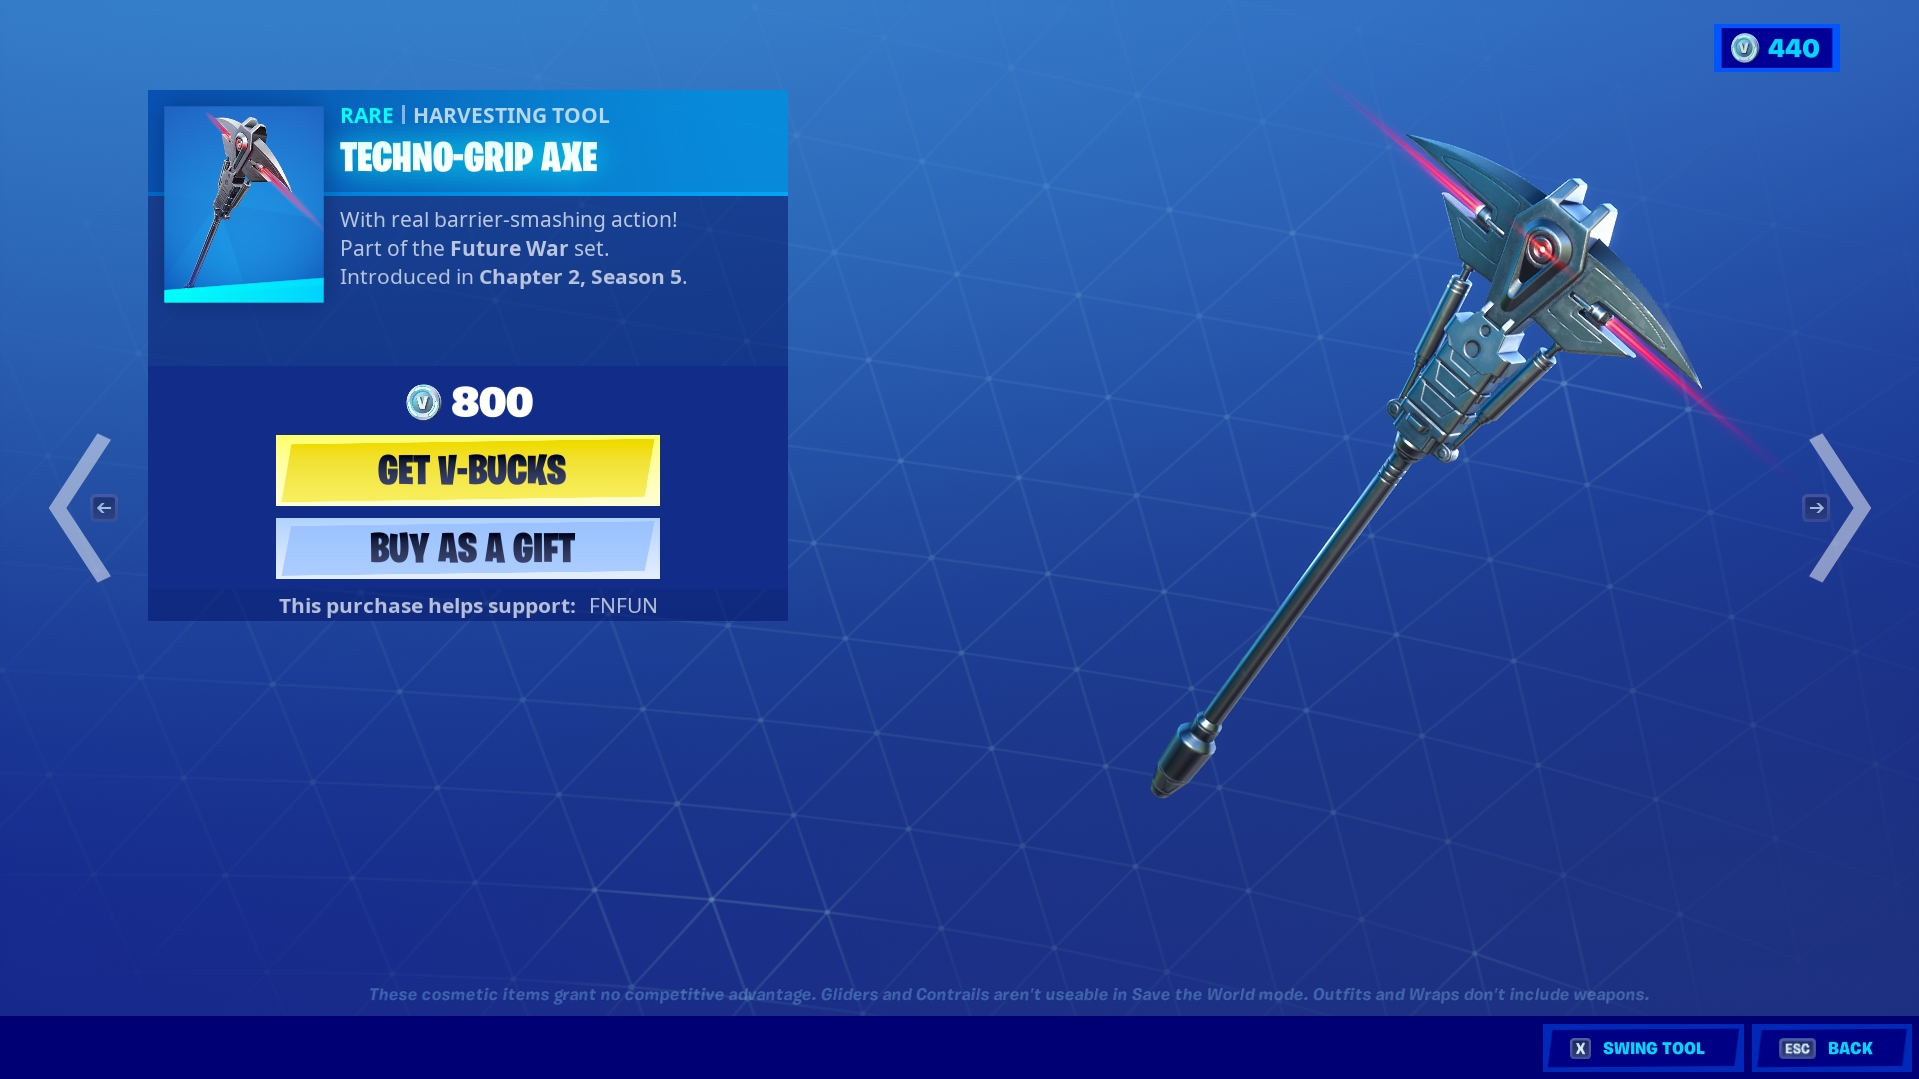 T-800 Terminator and Sarah Connor appeared in the Fortnite item shop  